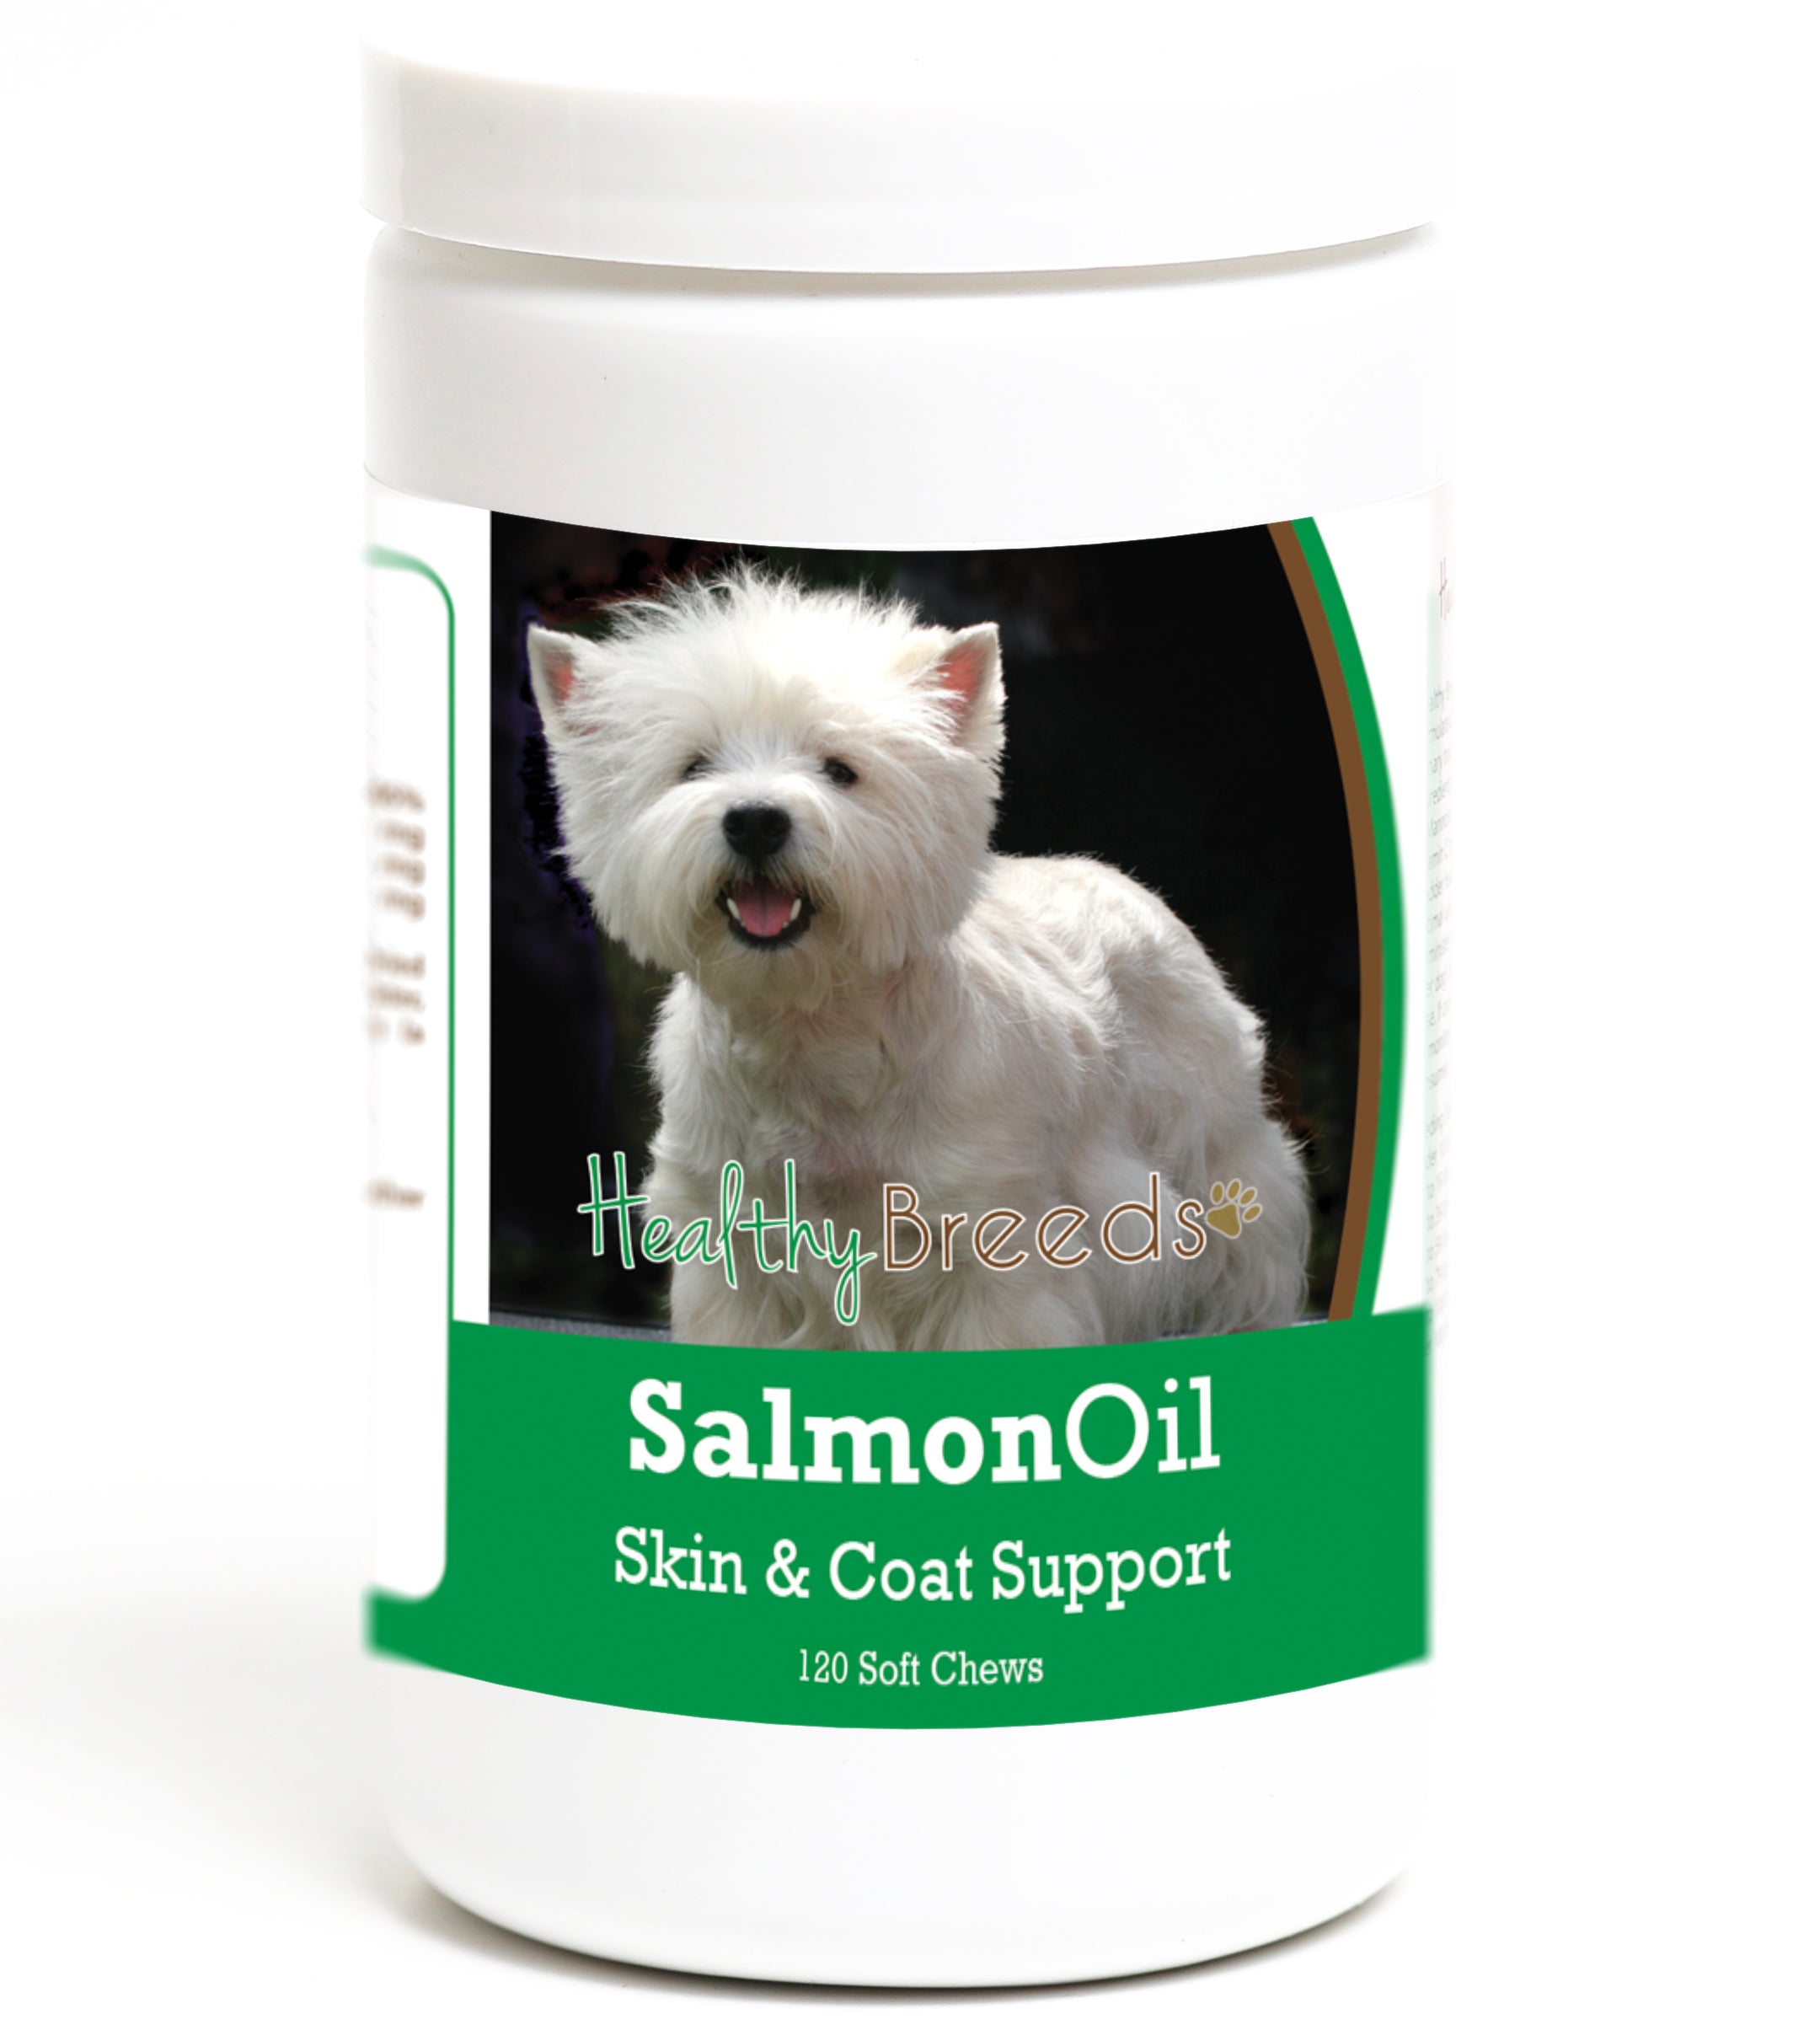 West Highland White Terrier Salmon Oil Soft Chews 120 Count